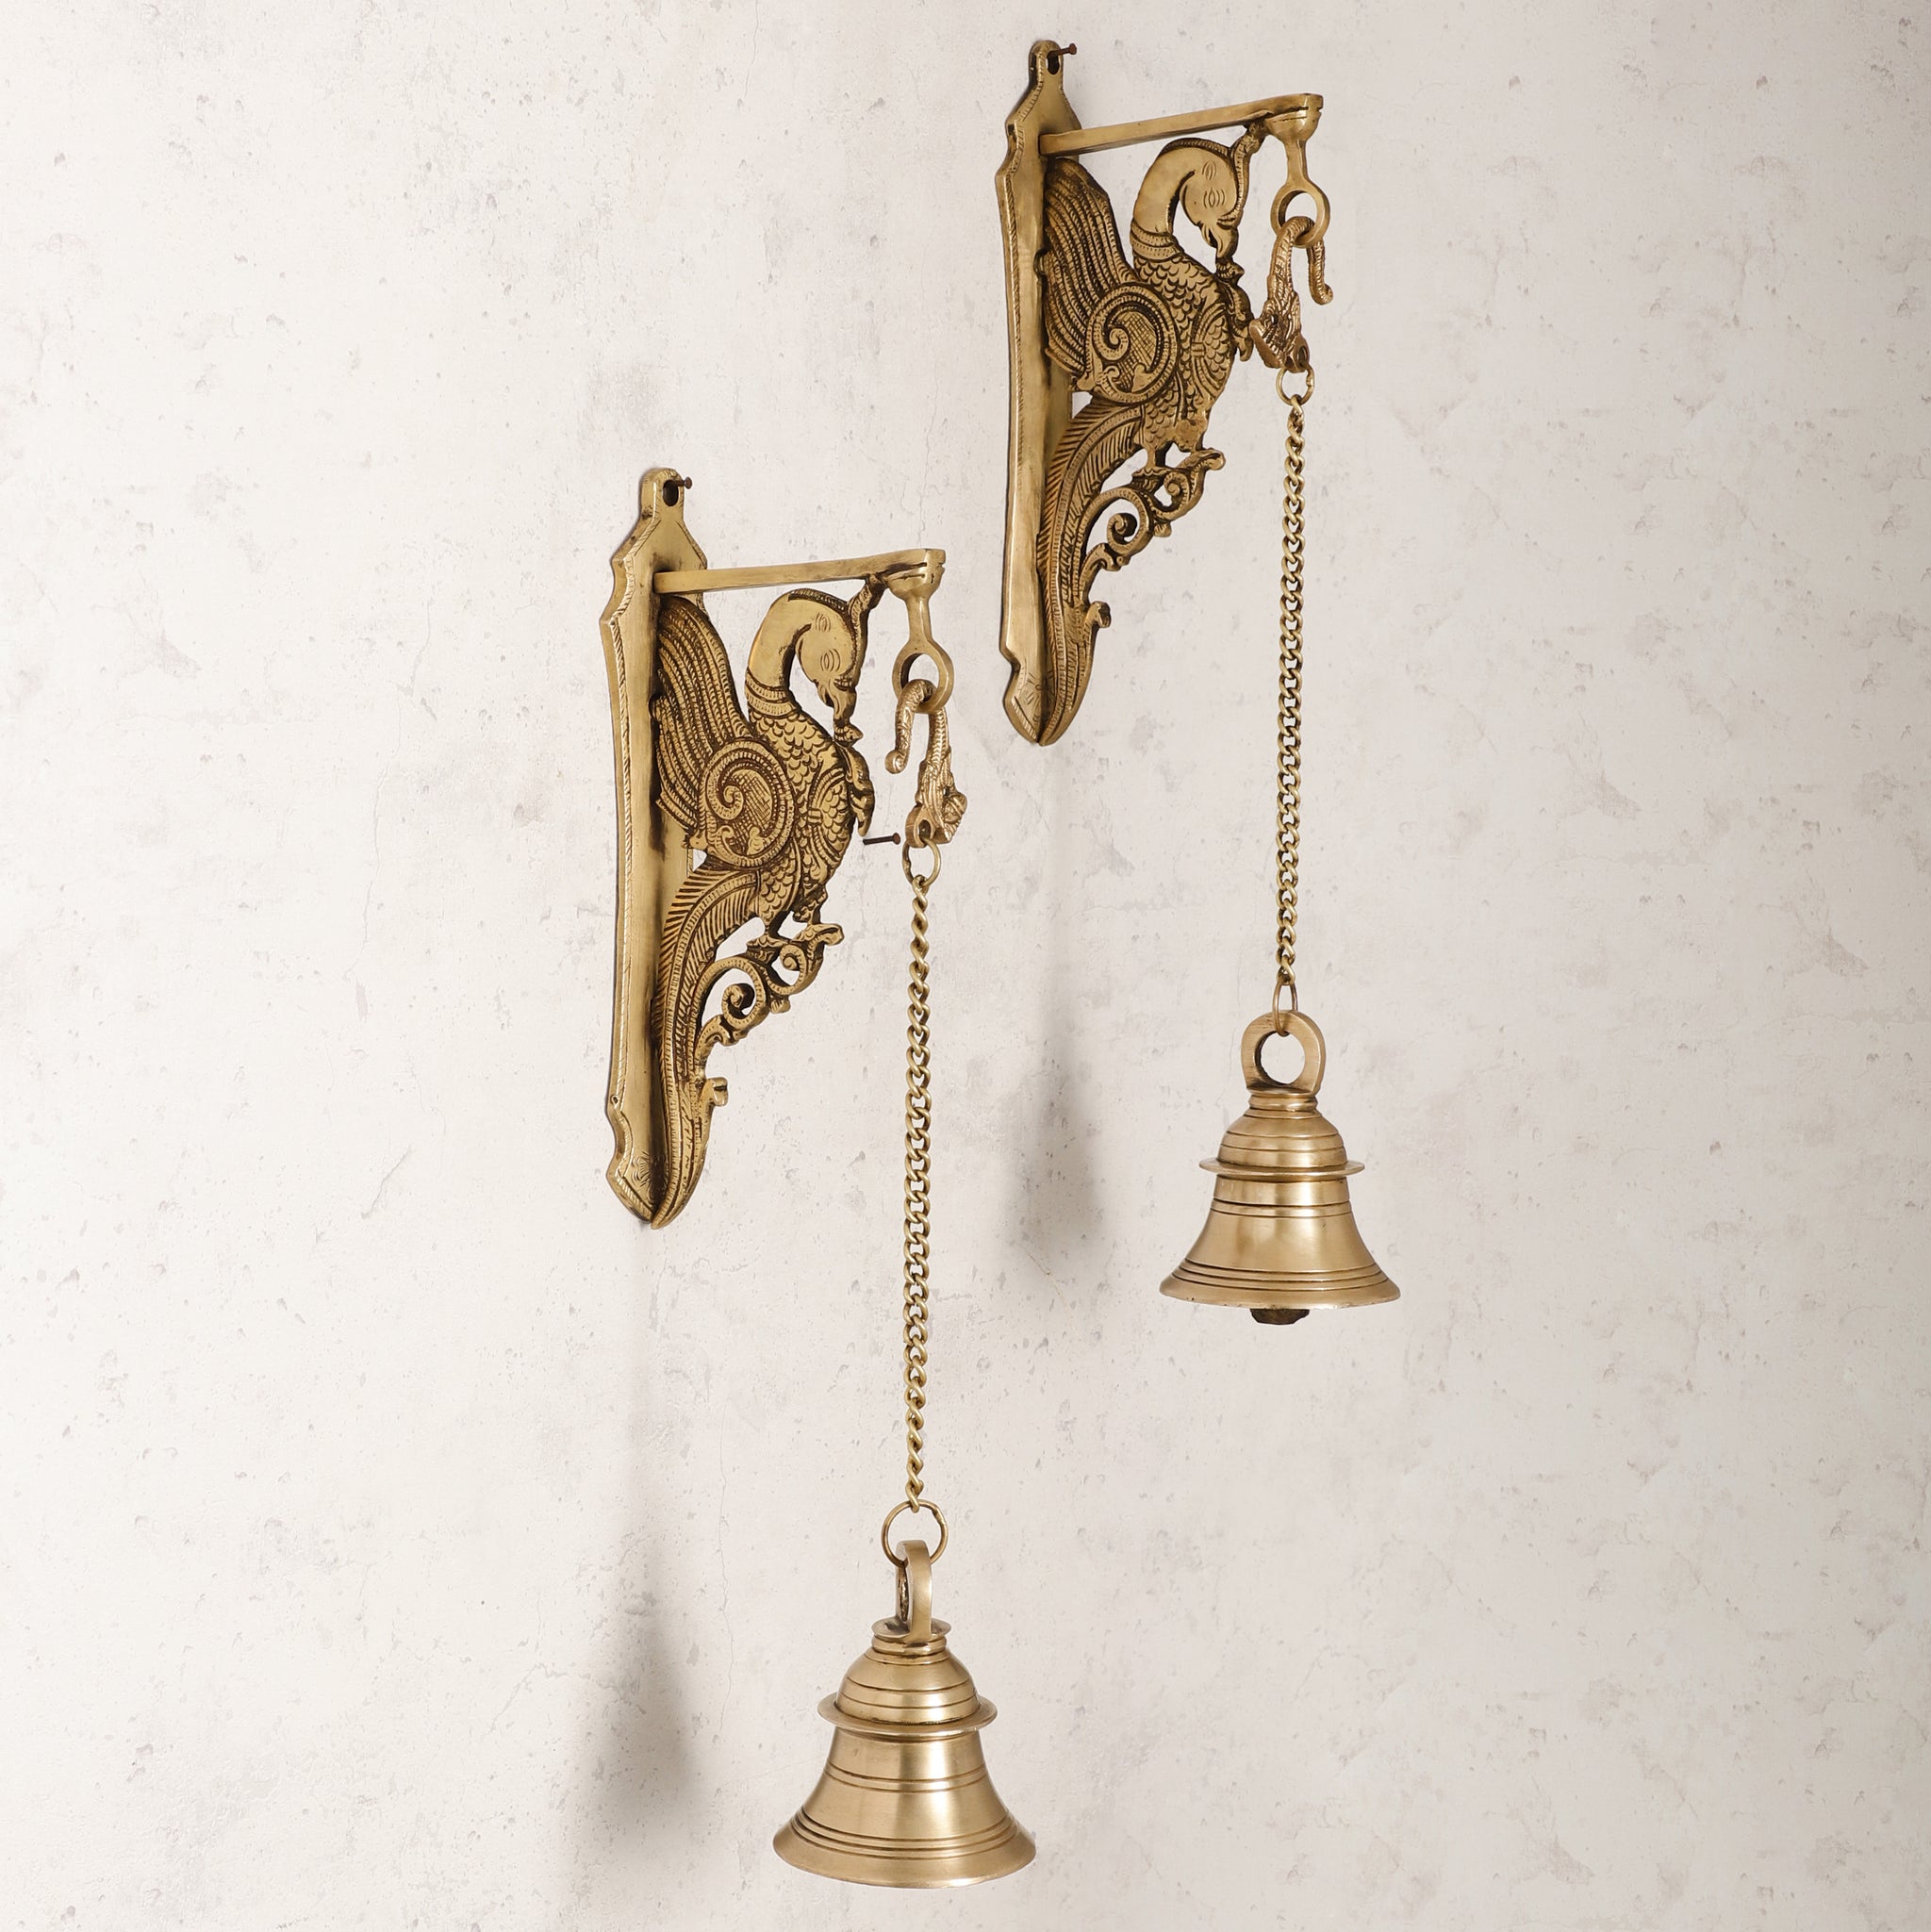 Hanging Bell - Brass Wall Hanging - Decorative and Religious